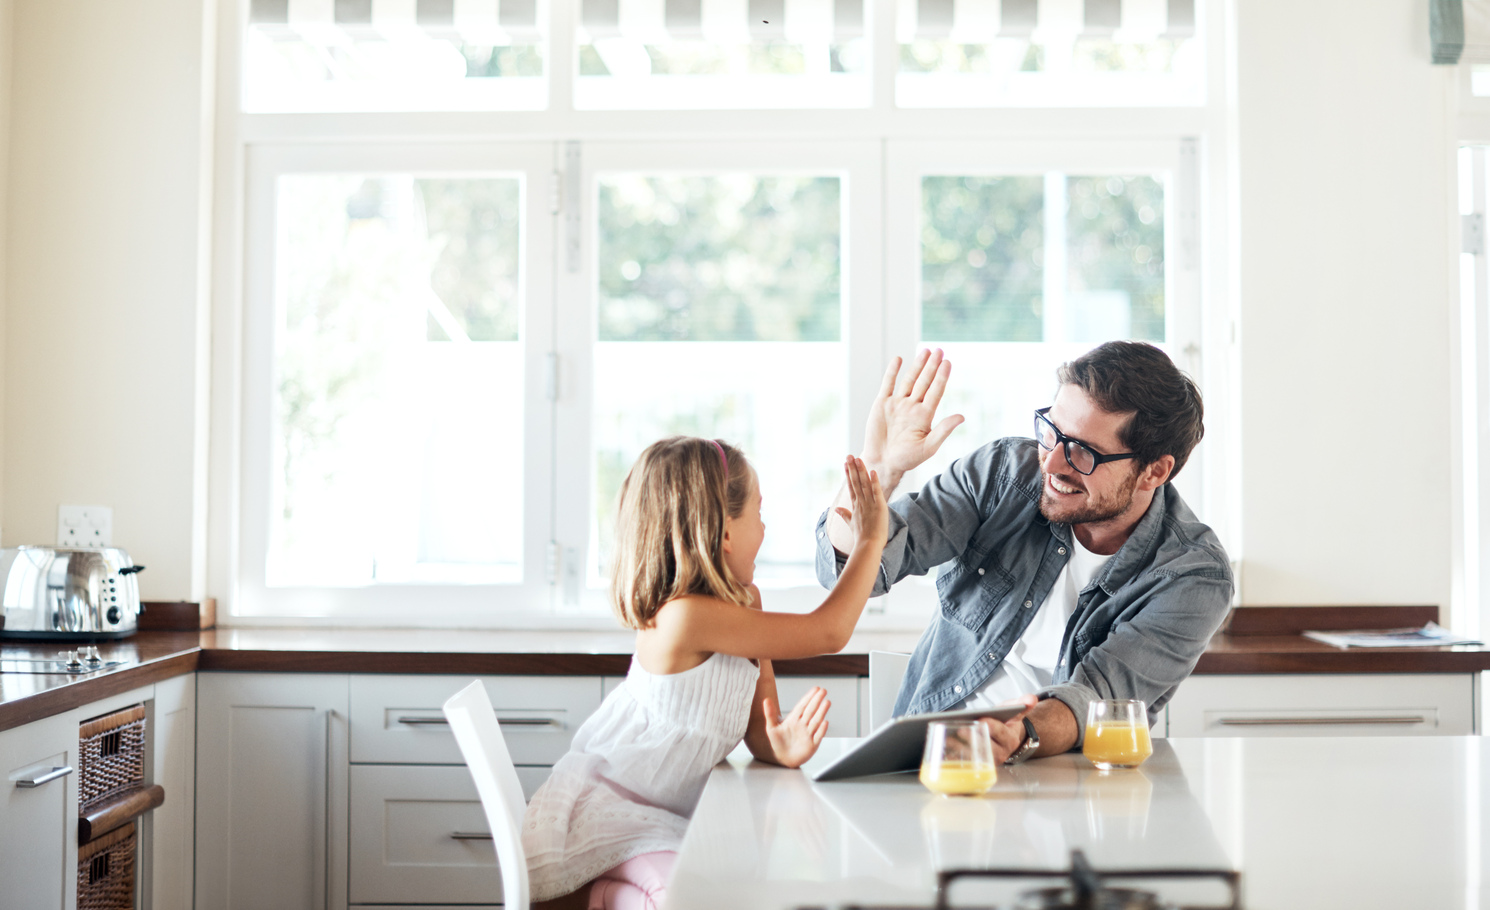 A father and daughter high fiving while sitting at the kitchen island